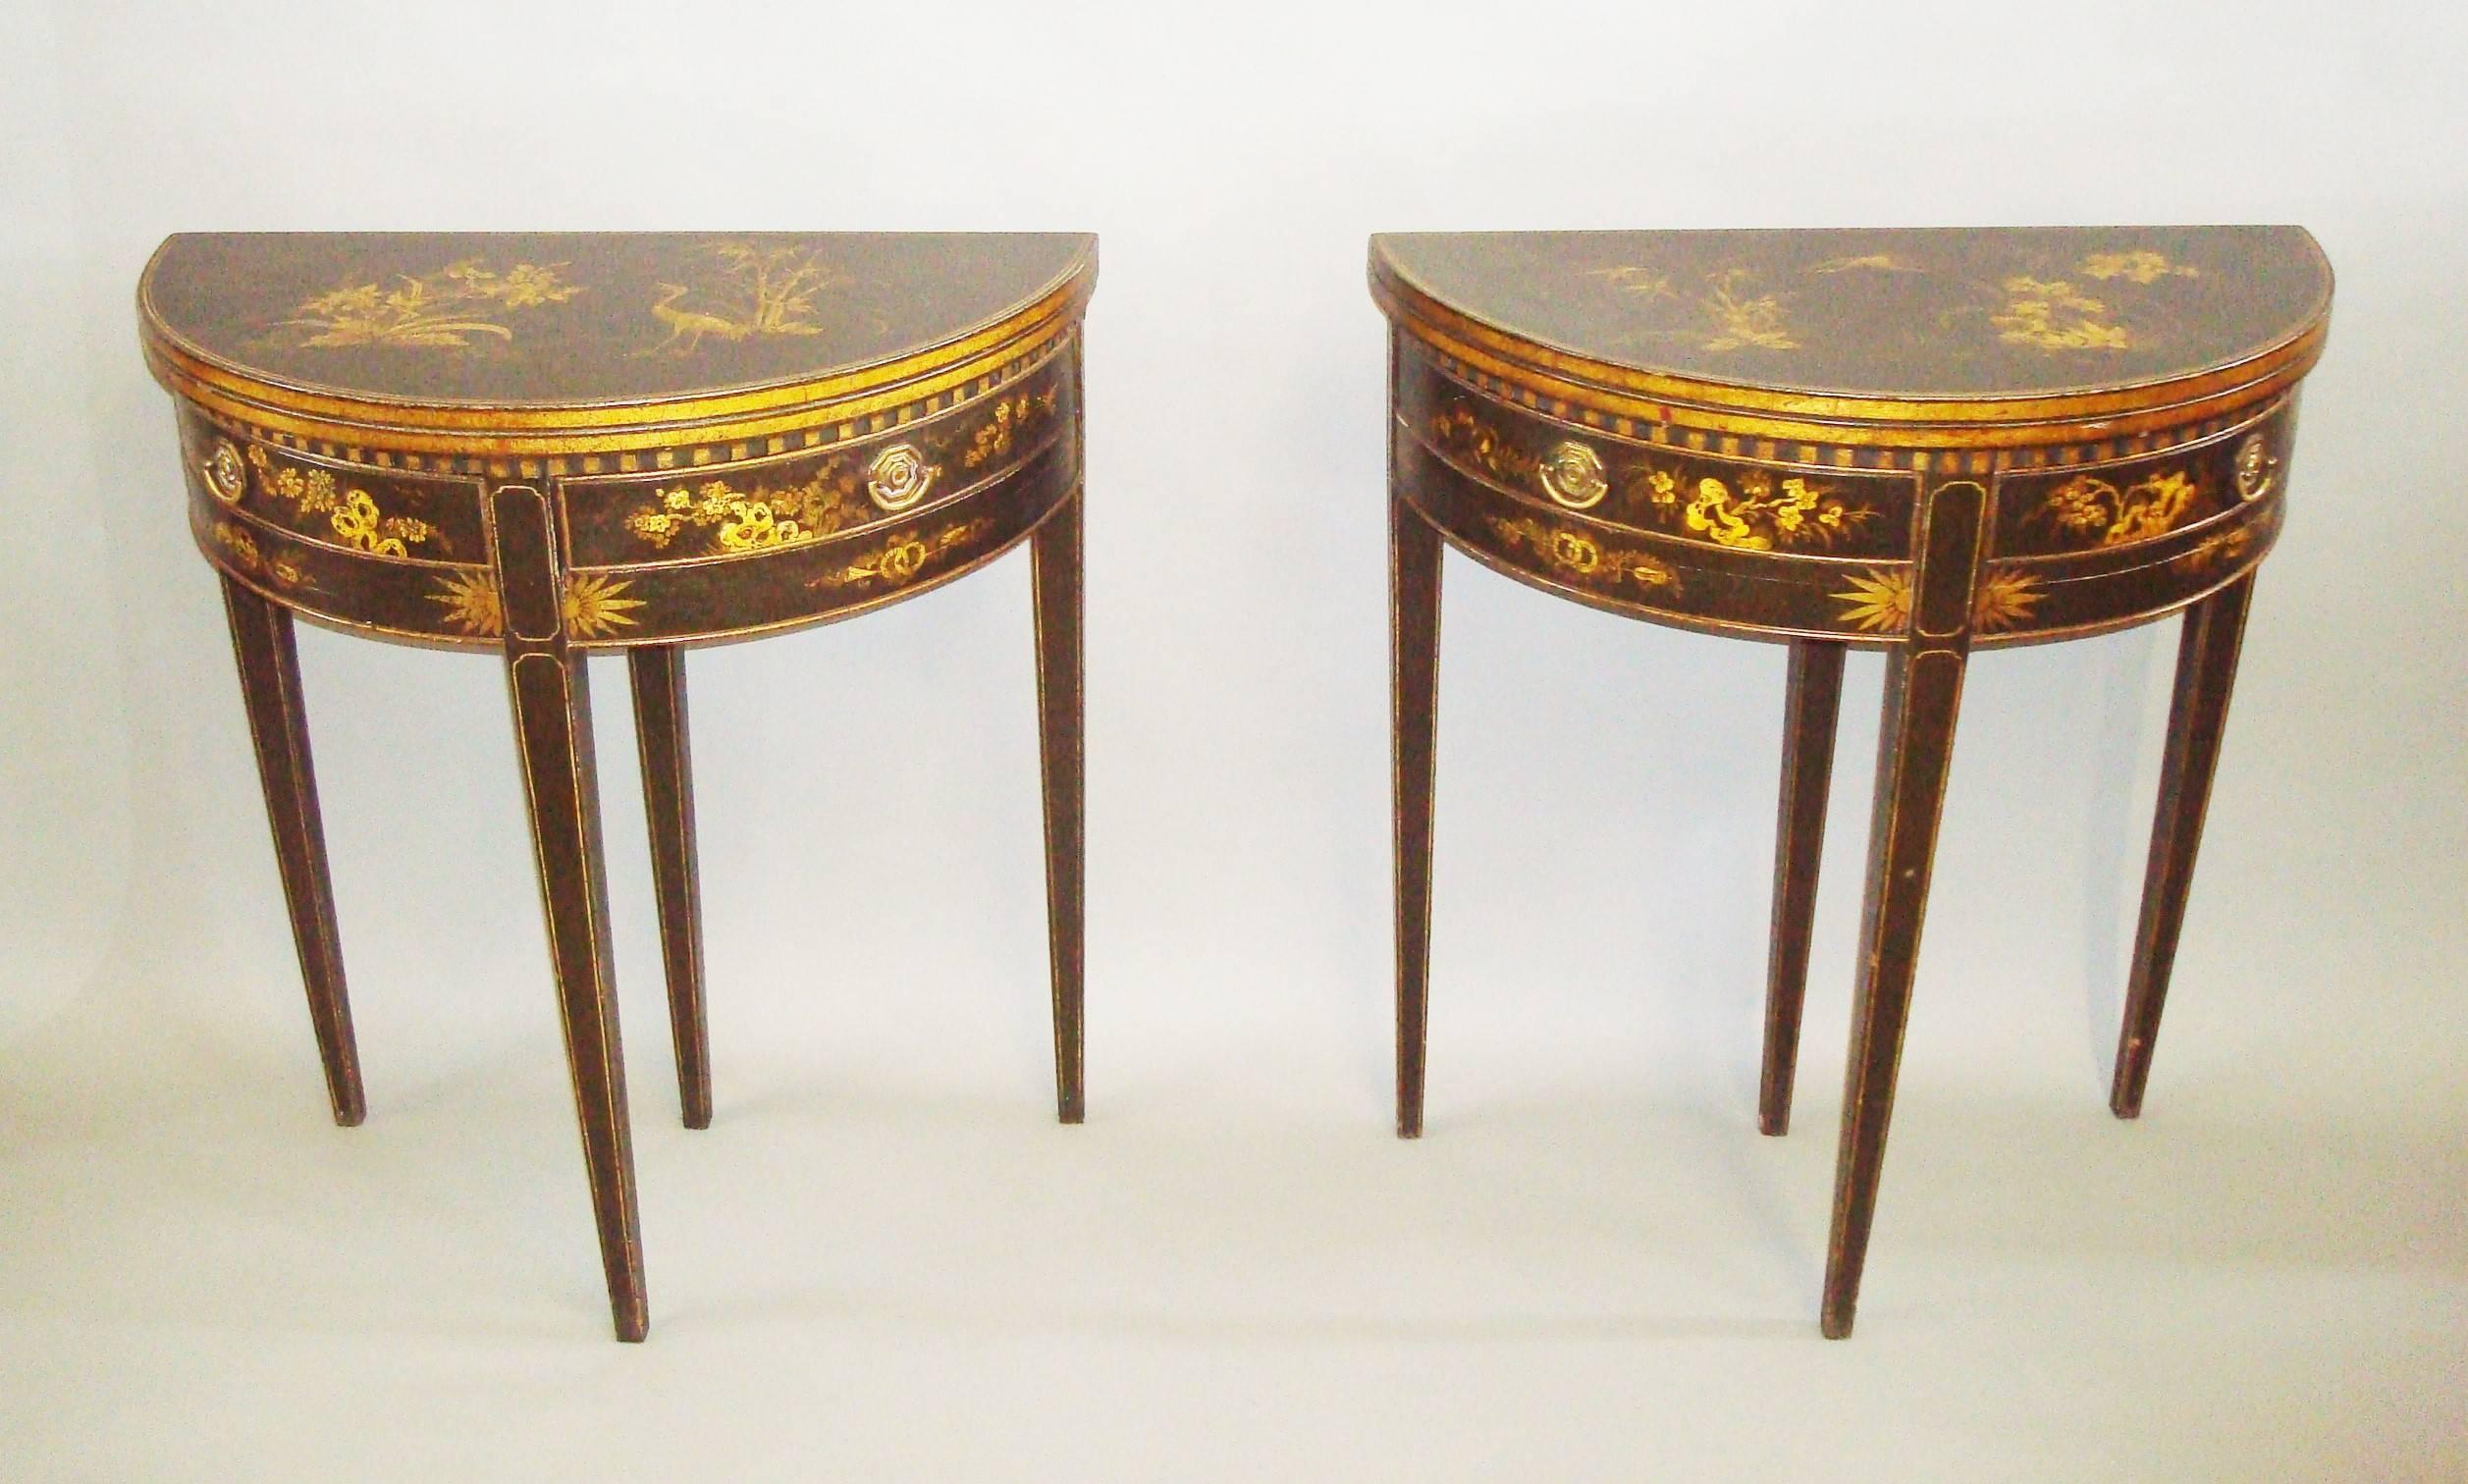 Late 19th century pair of chinoiserie lacquered demilune card tables; of small proportions with gilt decoration on a dark green background. The fold over tops decorated with Eastern birds, trees and foliage in a landscape. The interiors with a